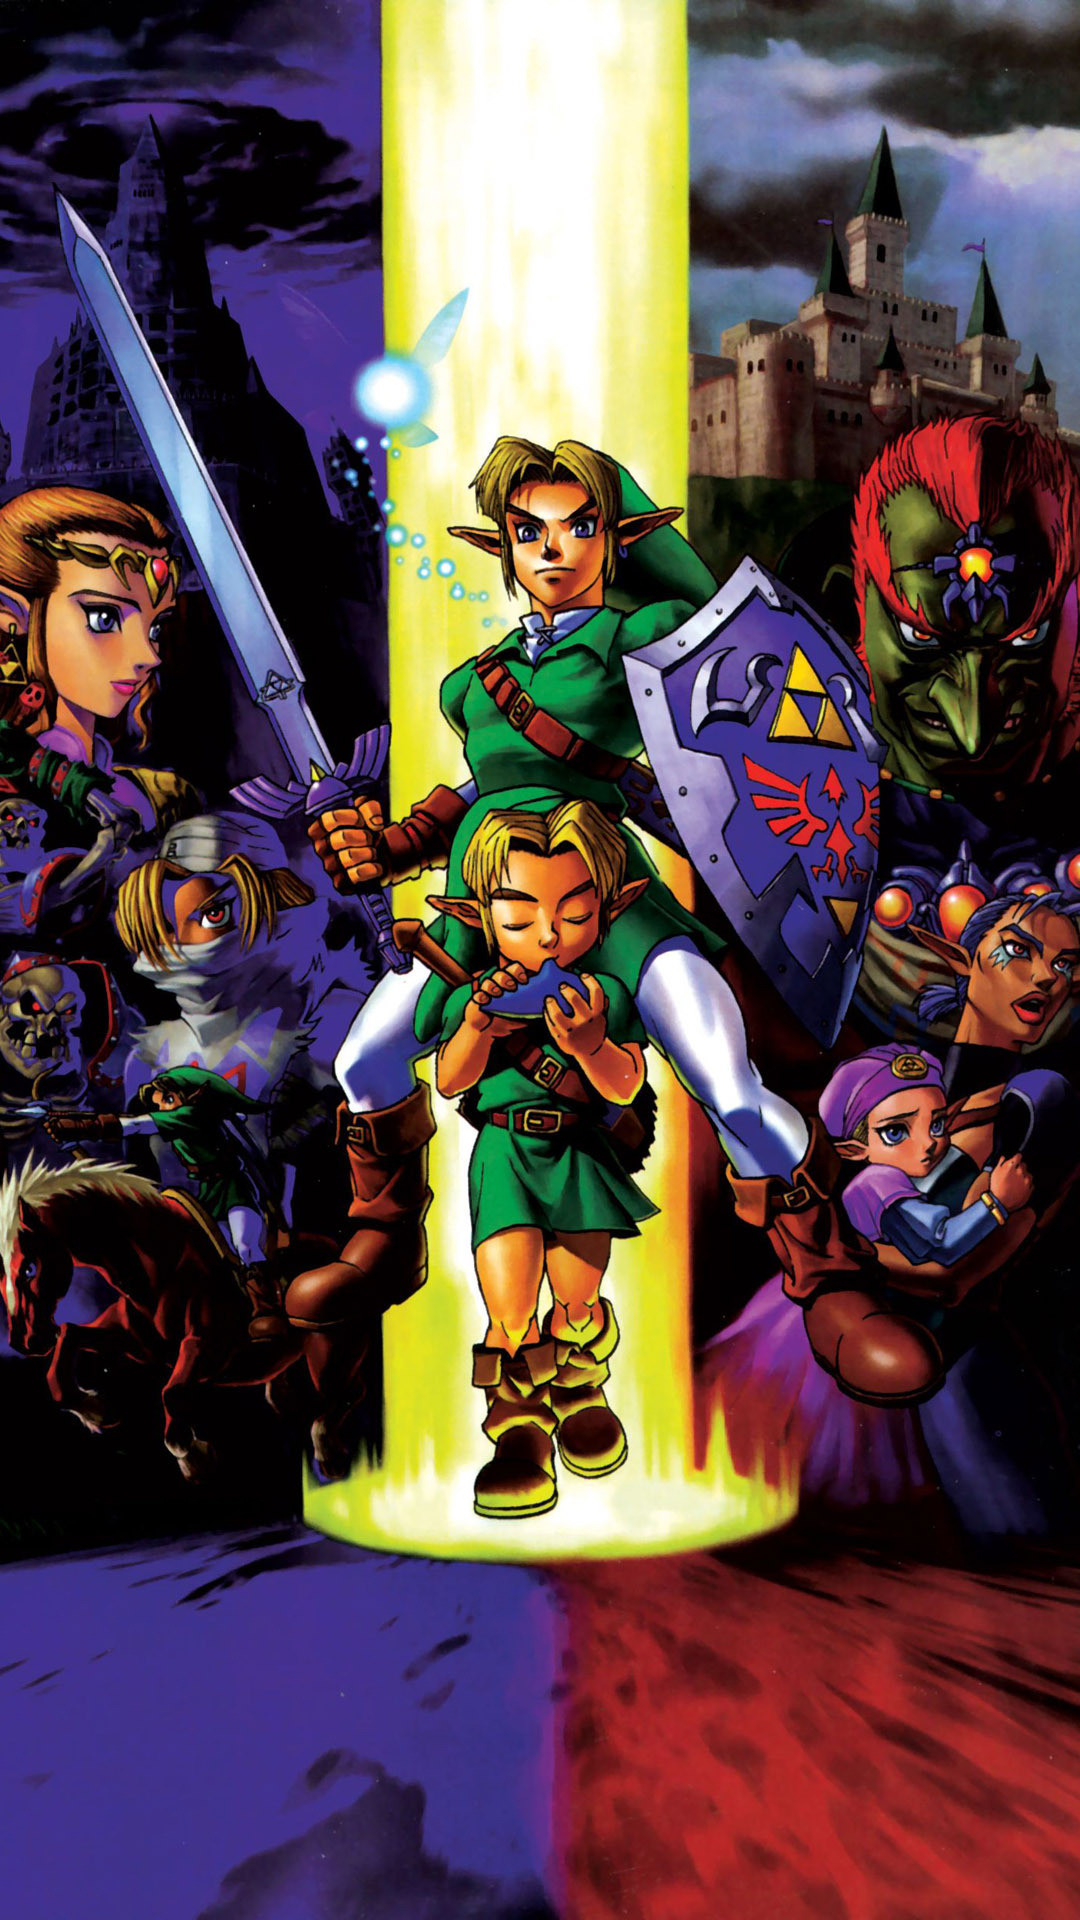 The legend of zelda ocarina of time mobile phone wallpapers in hd